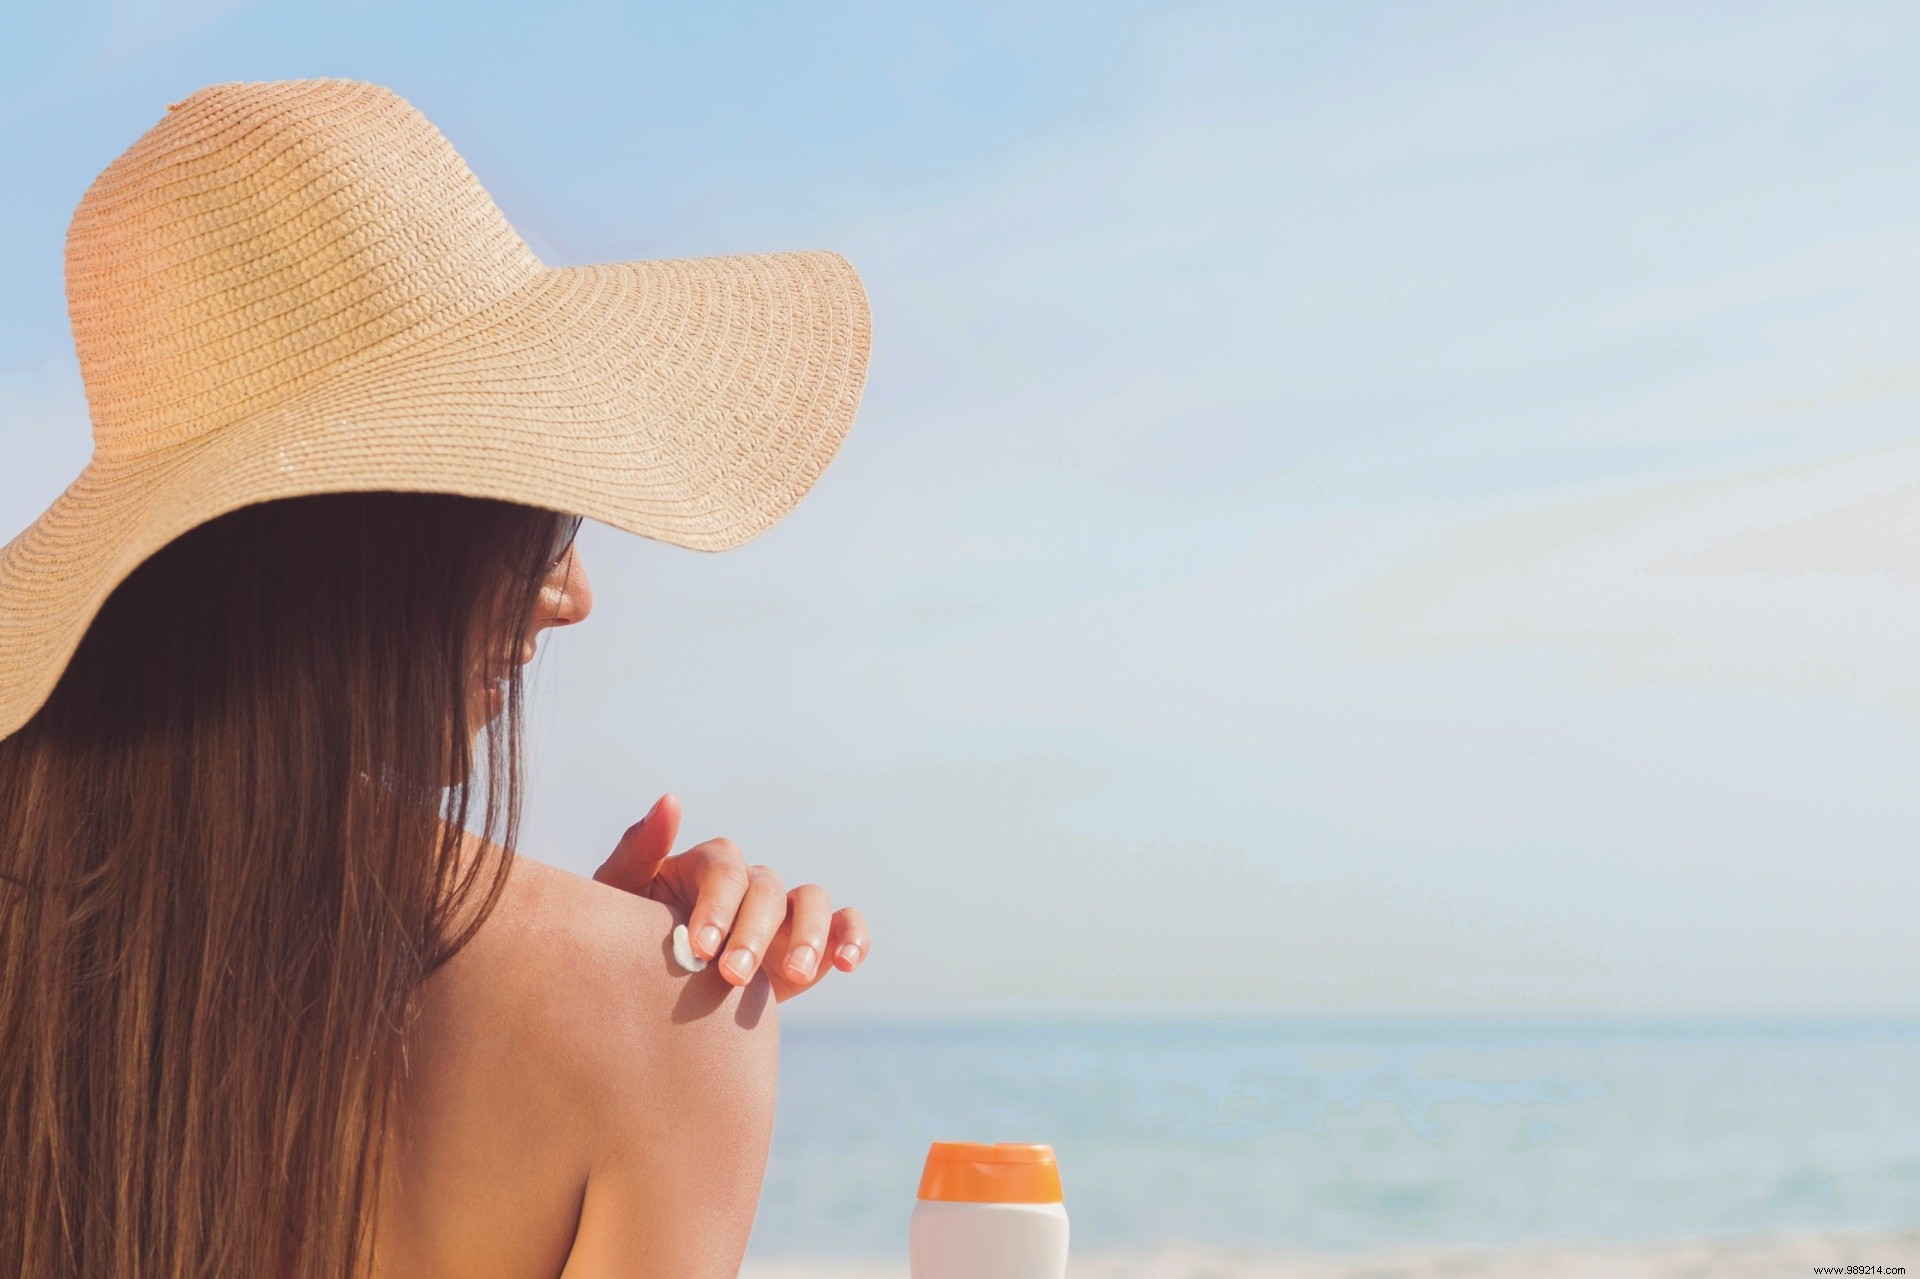 Why should you avoid reusing sunscreen year after year? 